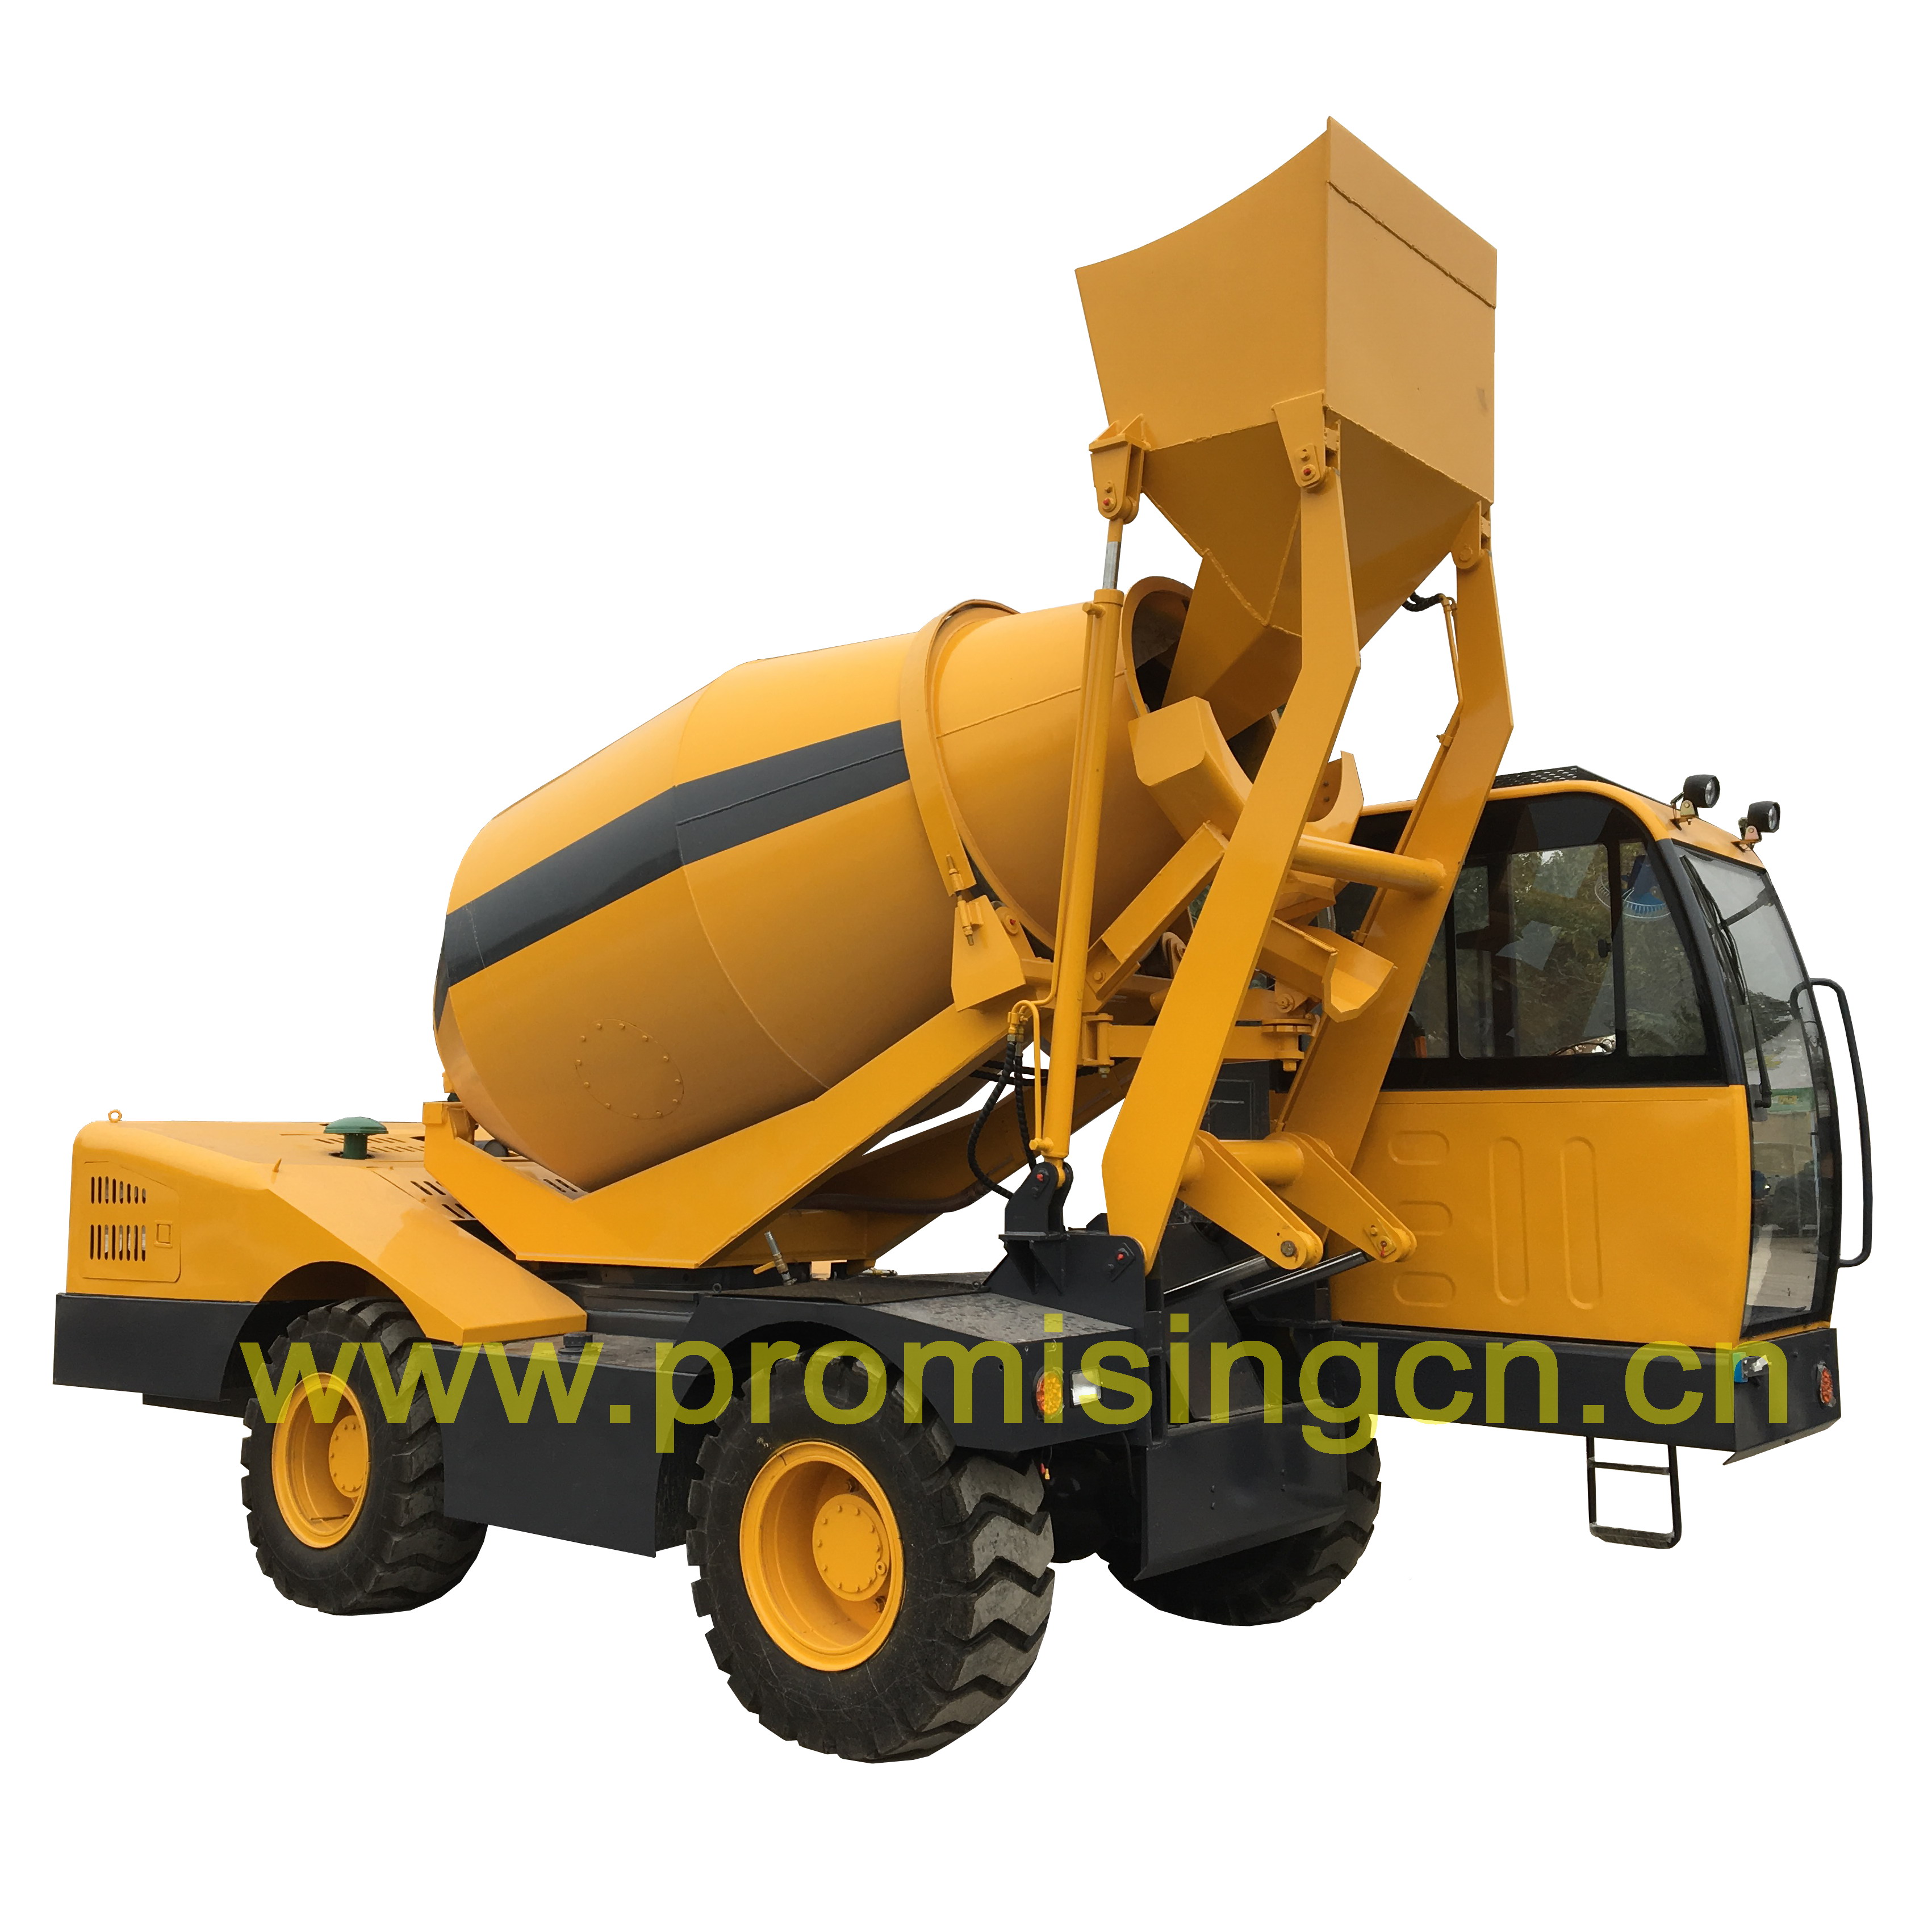 CONCRETE MIXER LOADER_Wheel Loader Manufacturer in China_Compact 